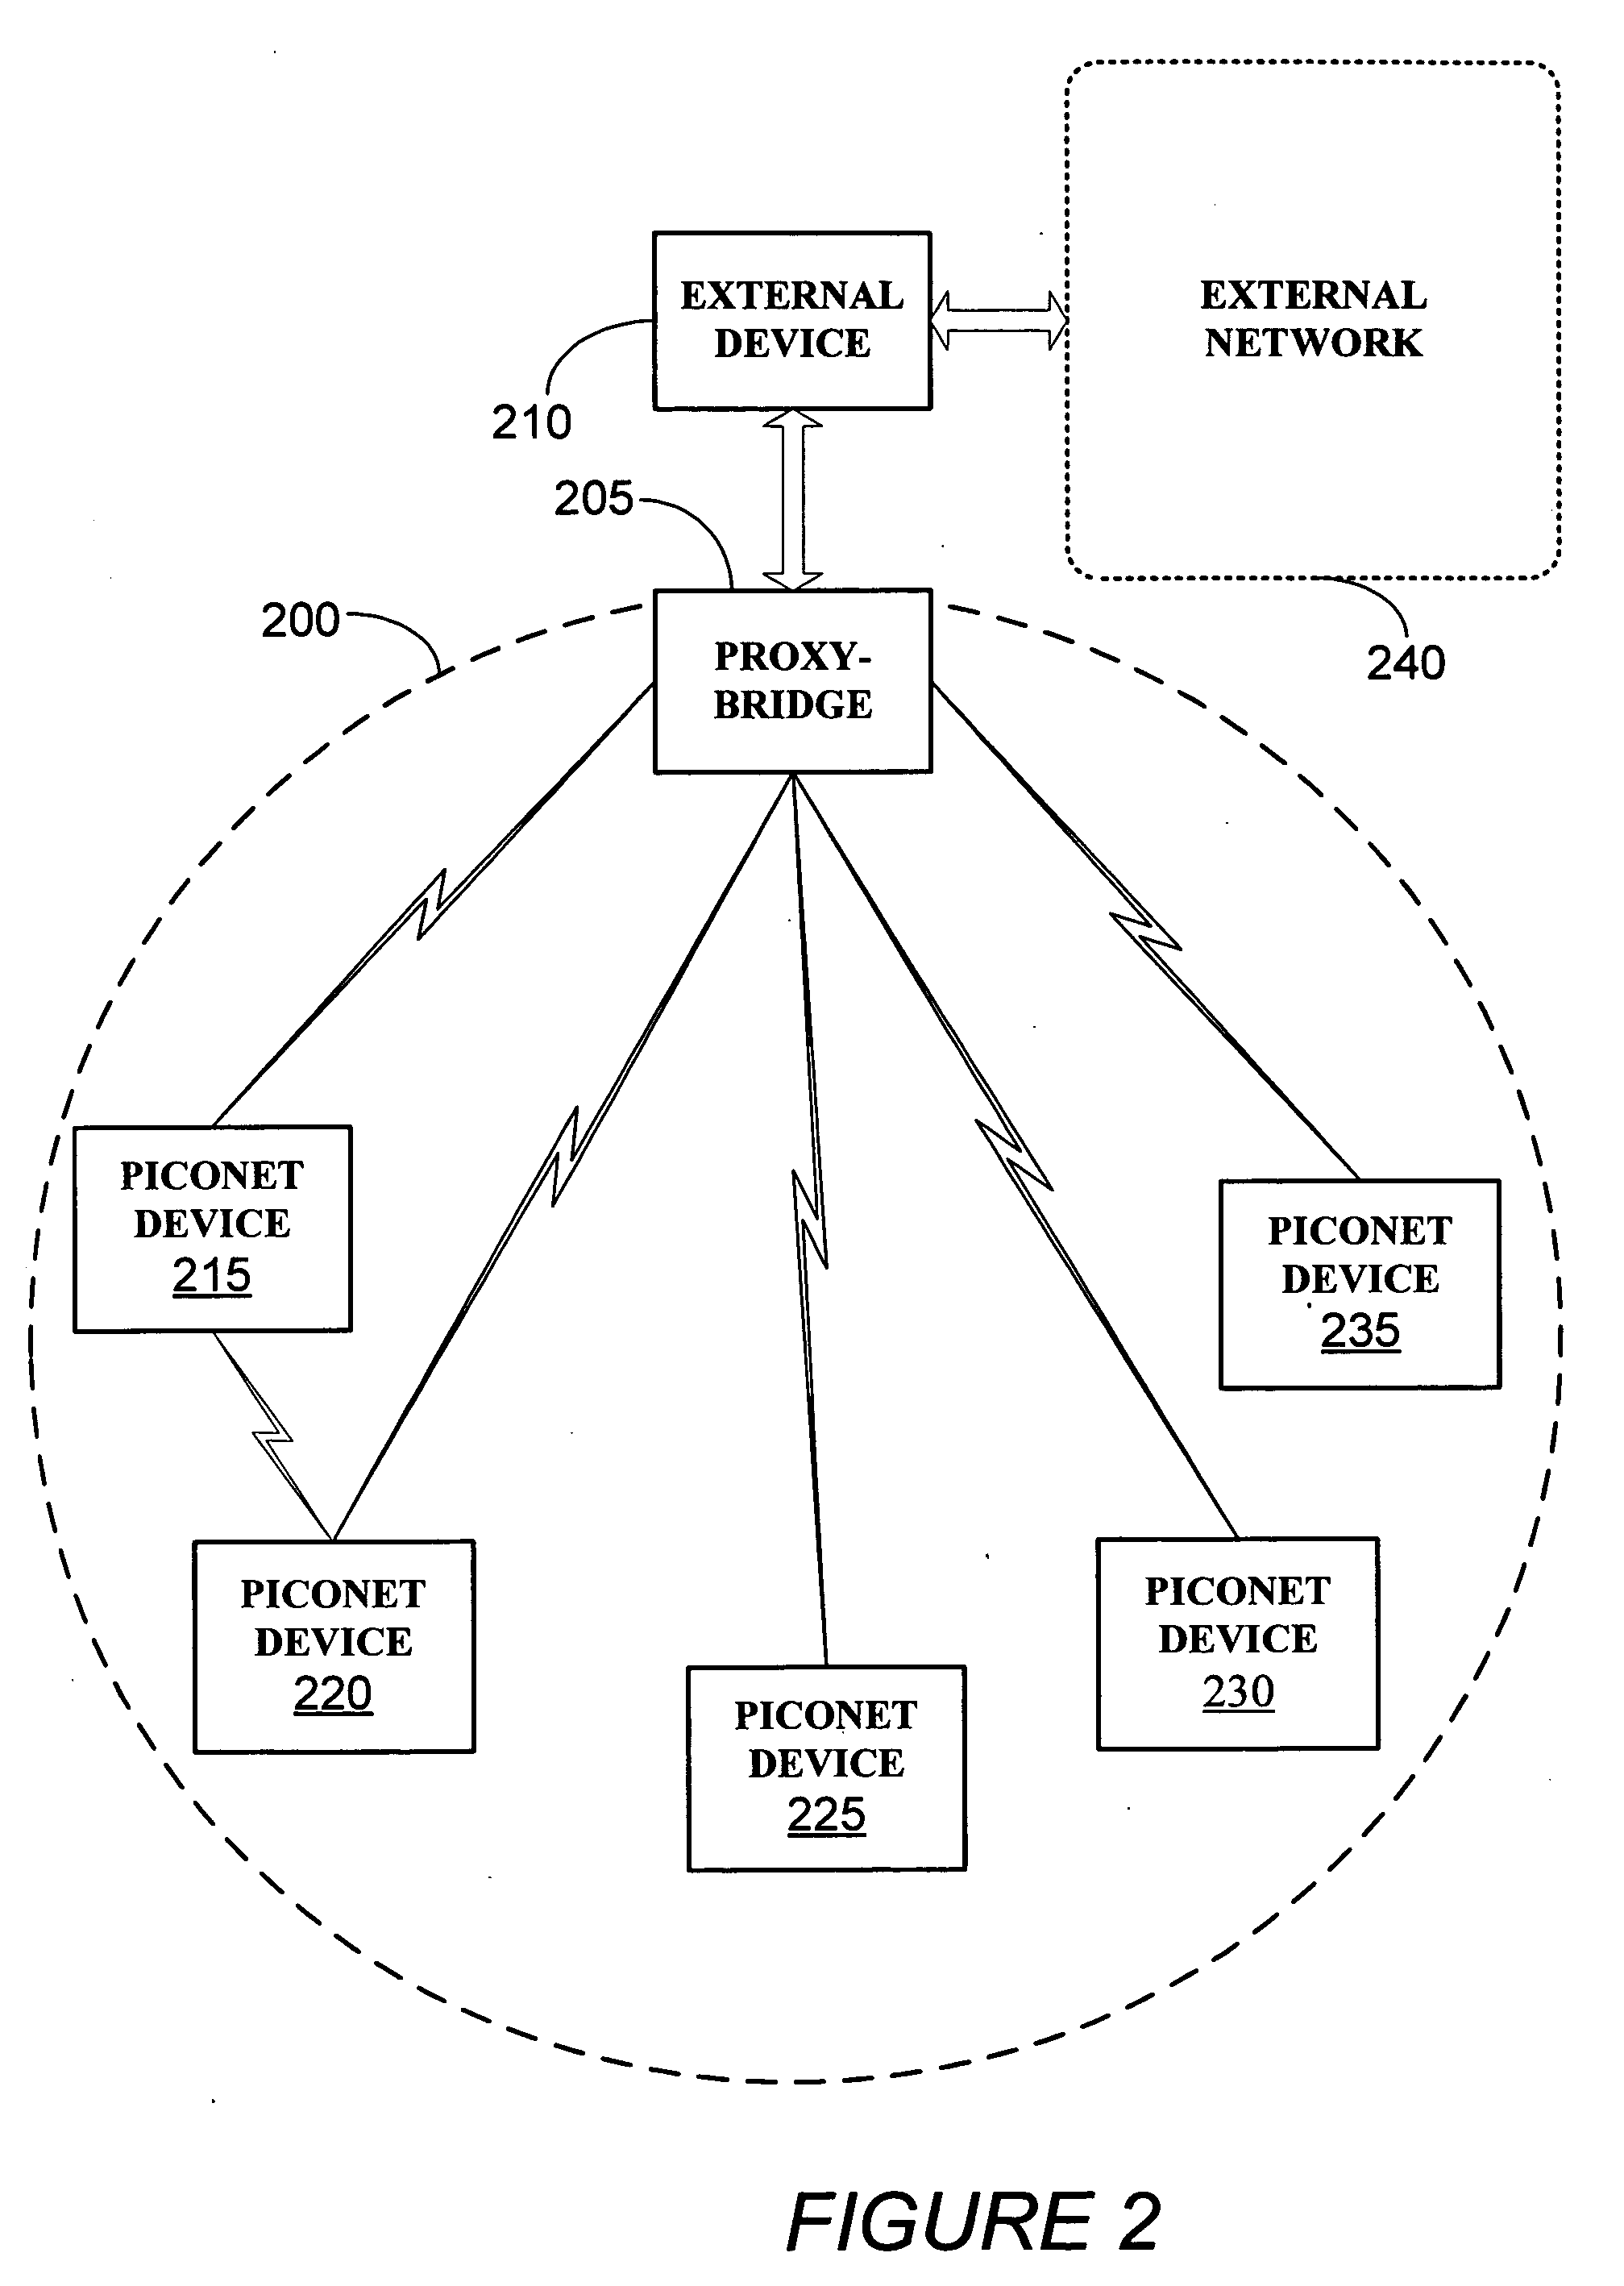 Extending access to a device in a limited connectivity network to devices residing outside the limited connectivity network